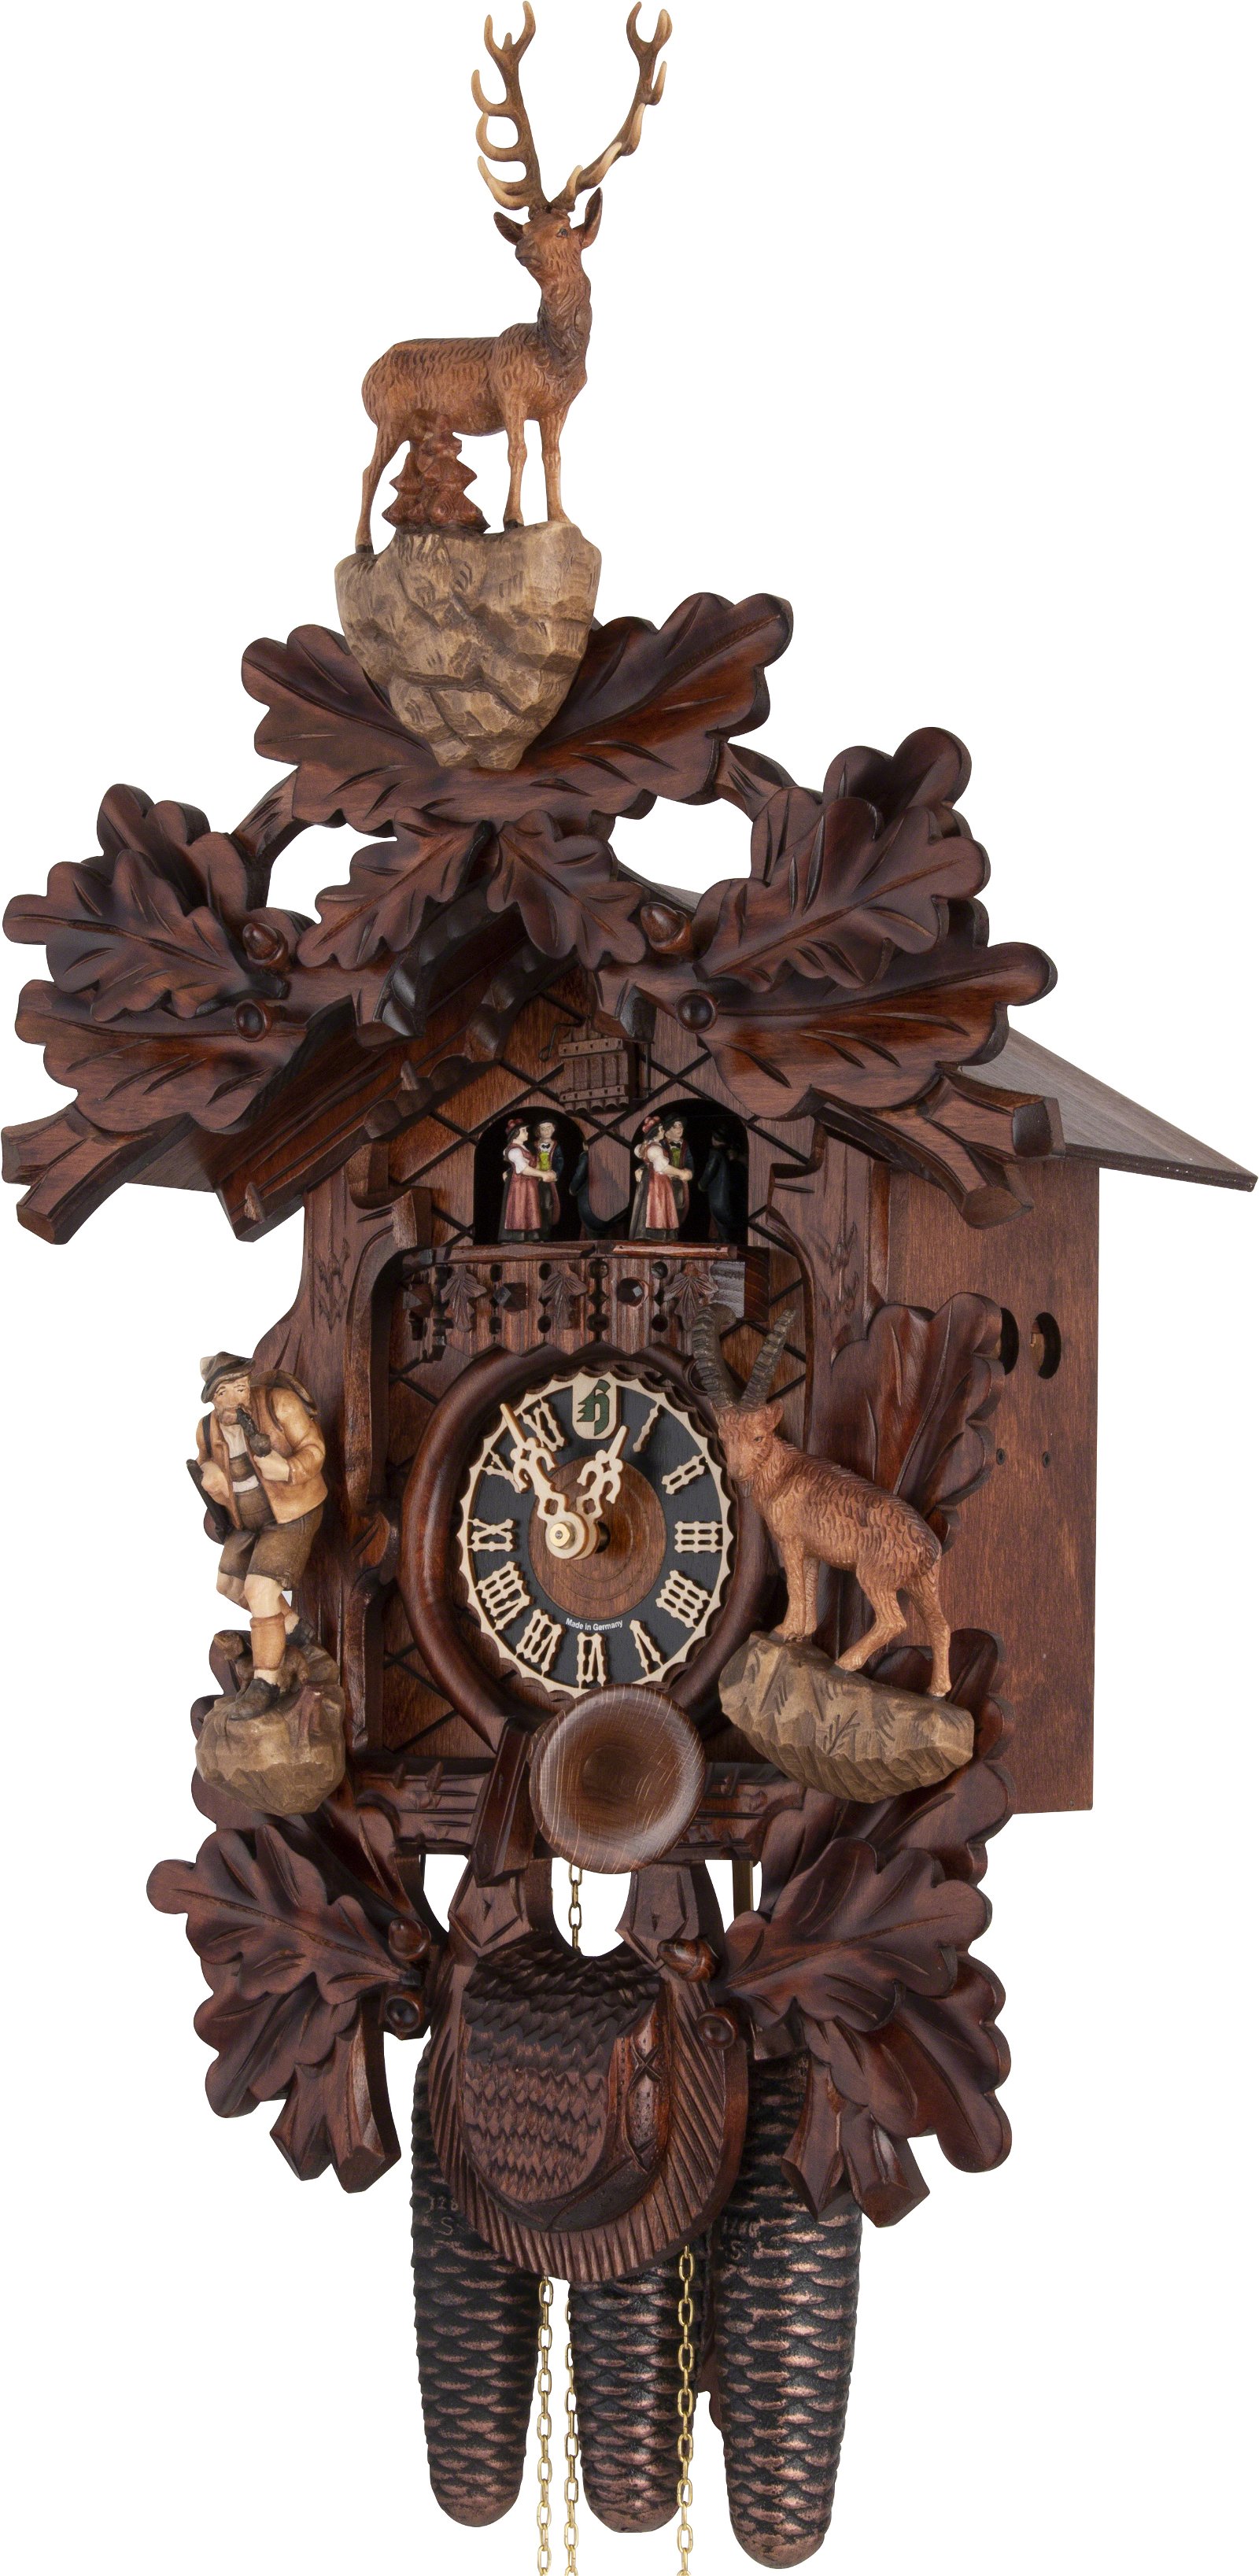 Cuckoo Clock Carved Style 8 Day Movement 62cm by Hönes